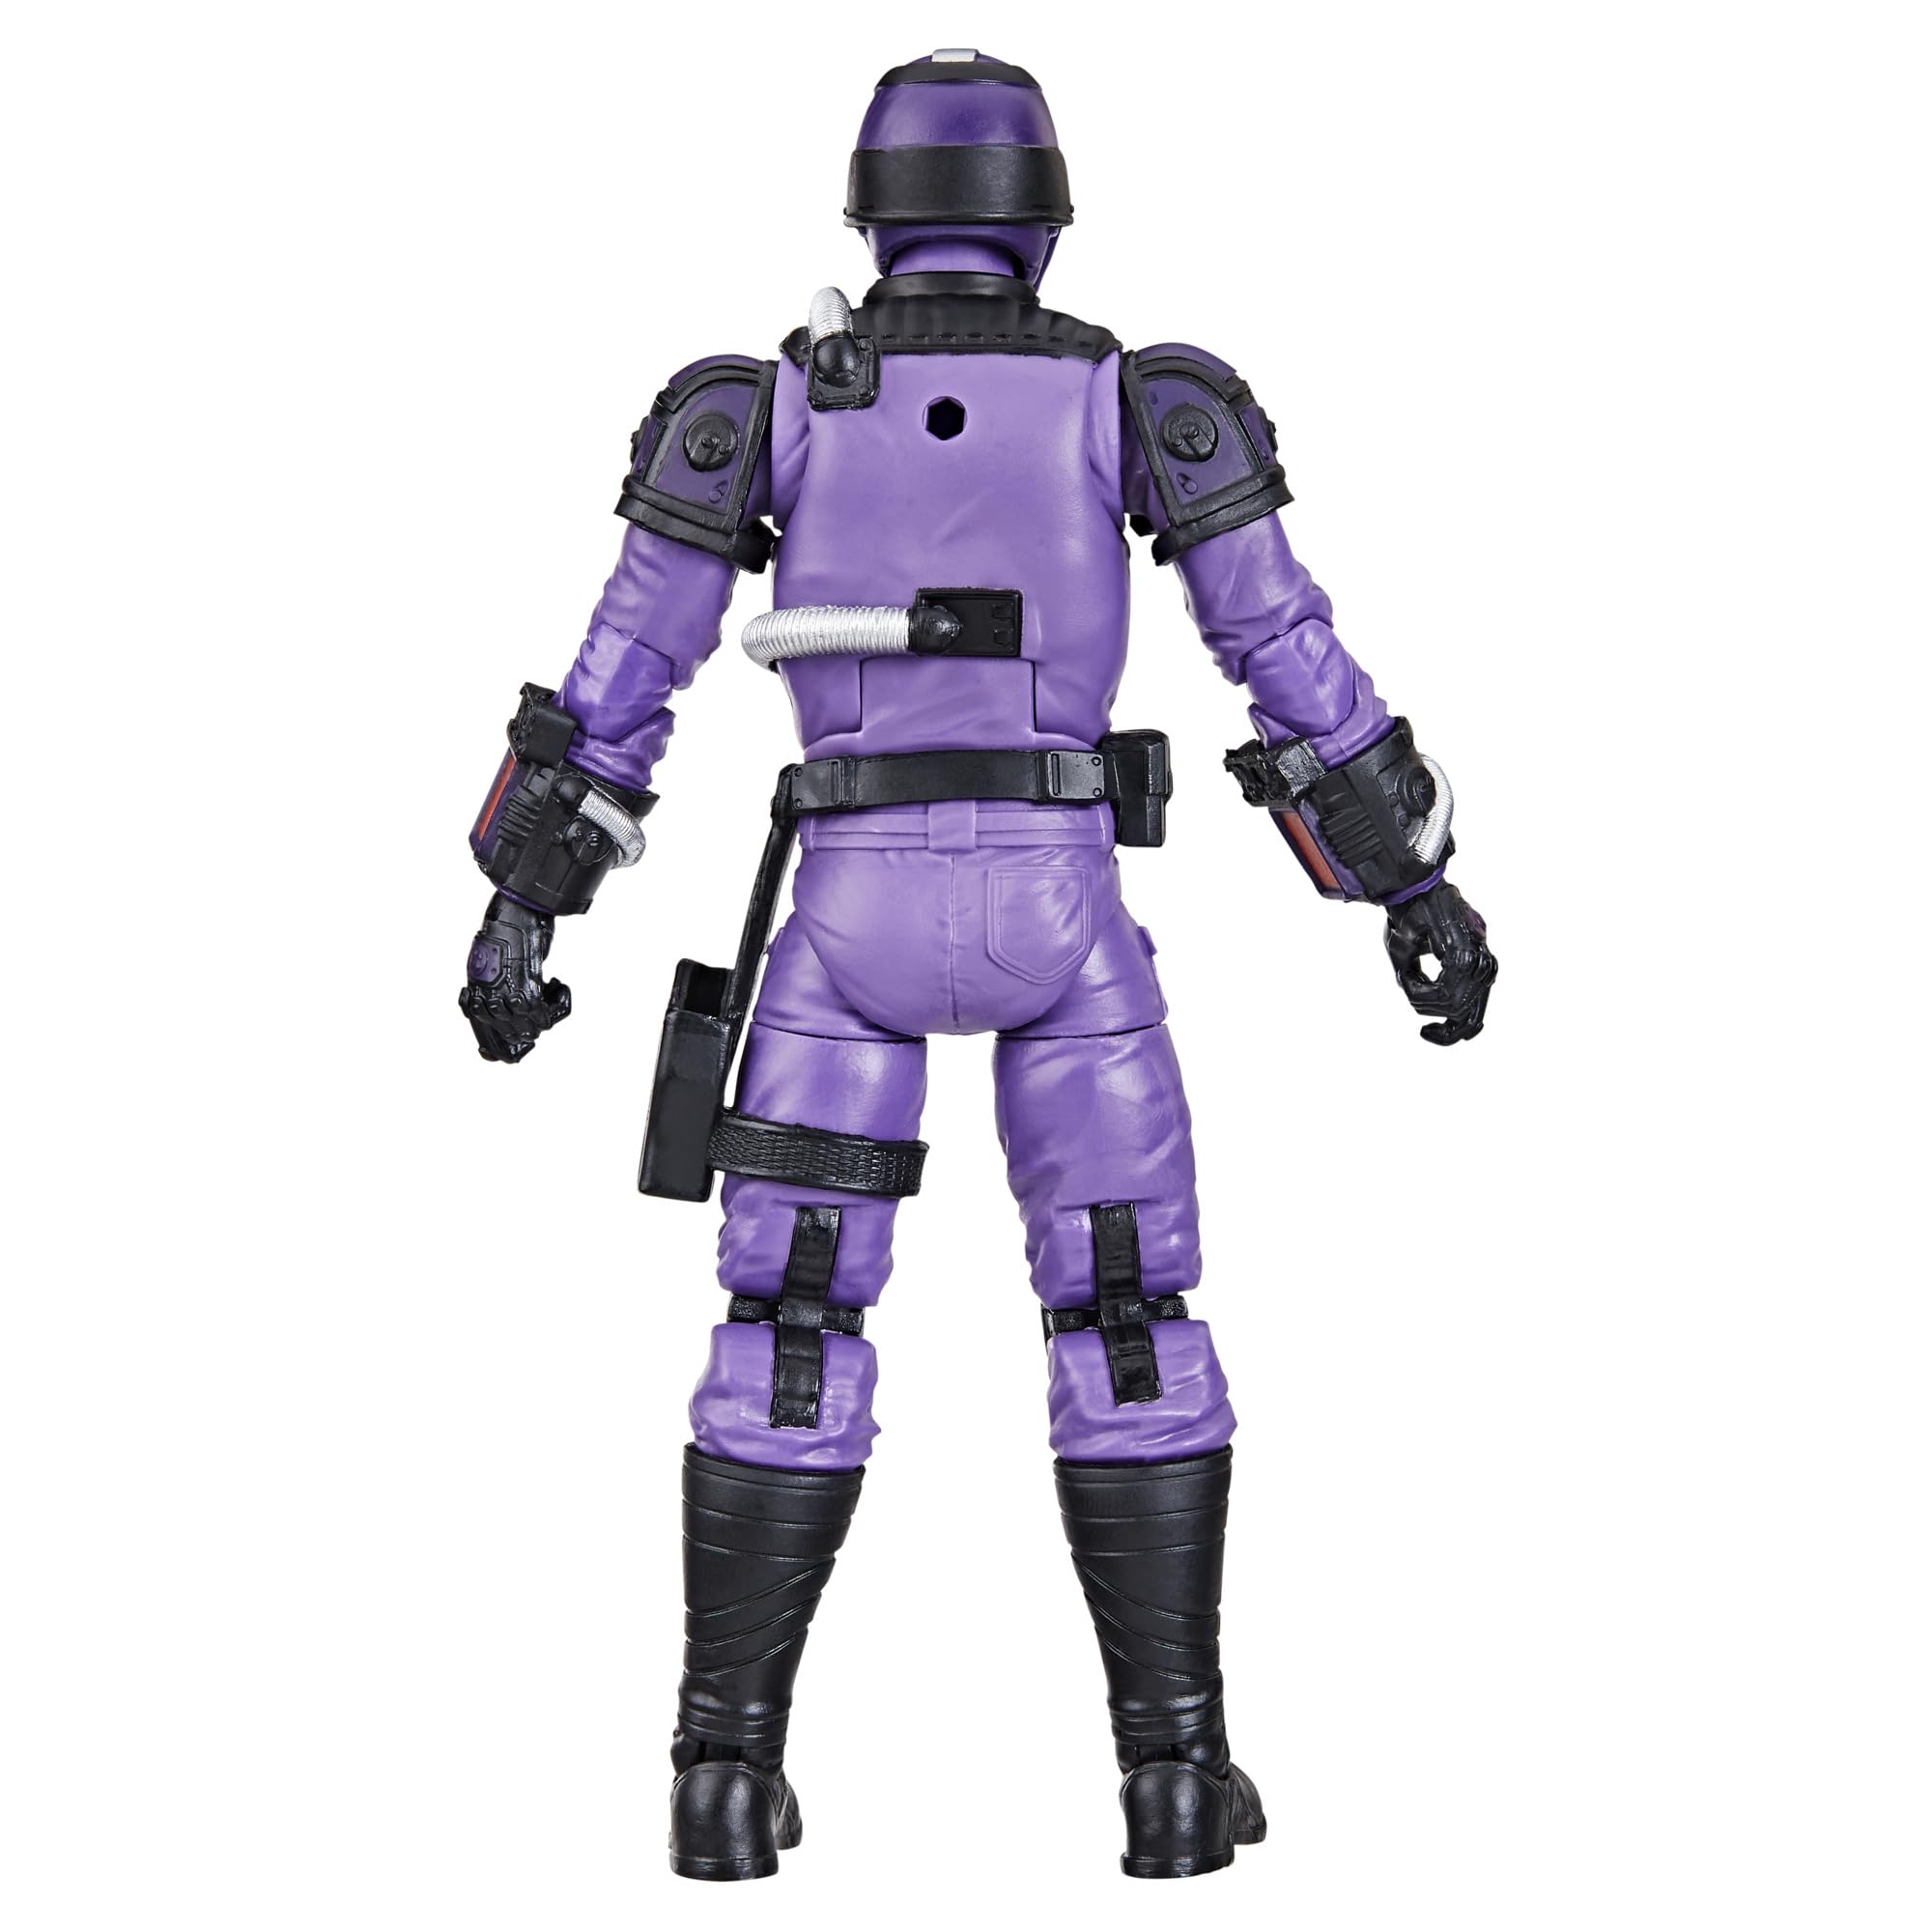 G.I. Joe Classified Series #117, Techno-Viper, Collectible 6-Inch Action Figure with 8 Accessories